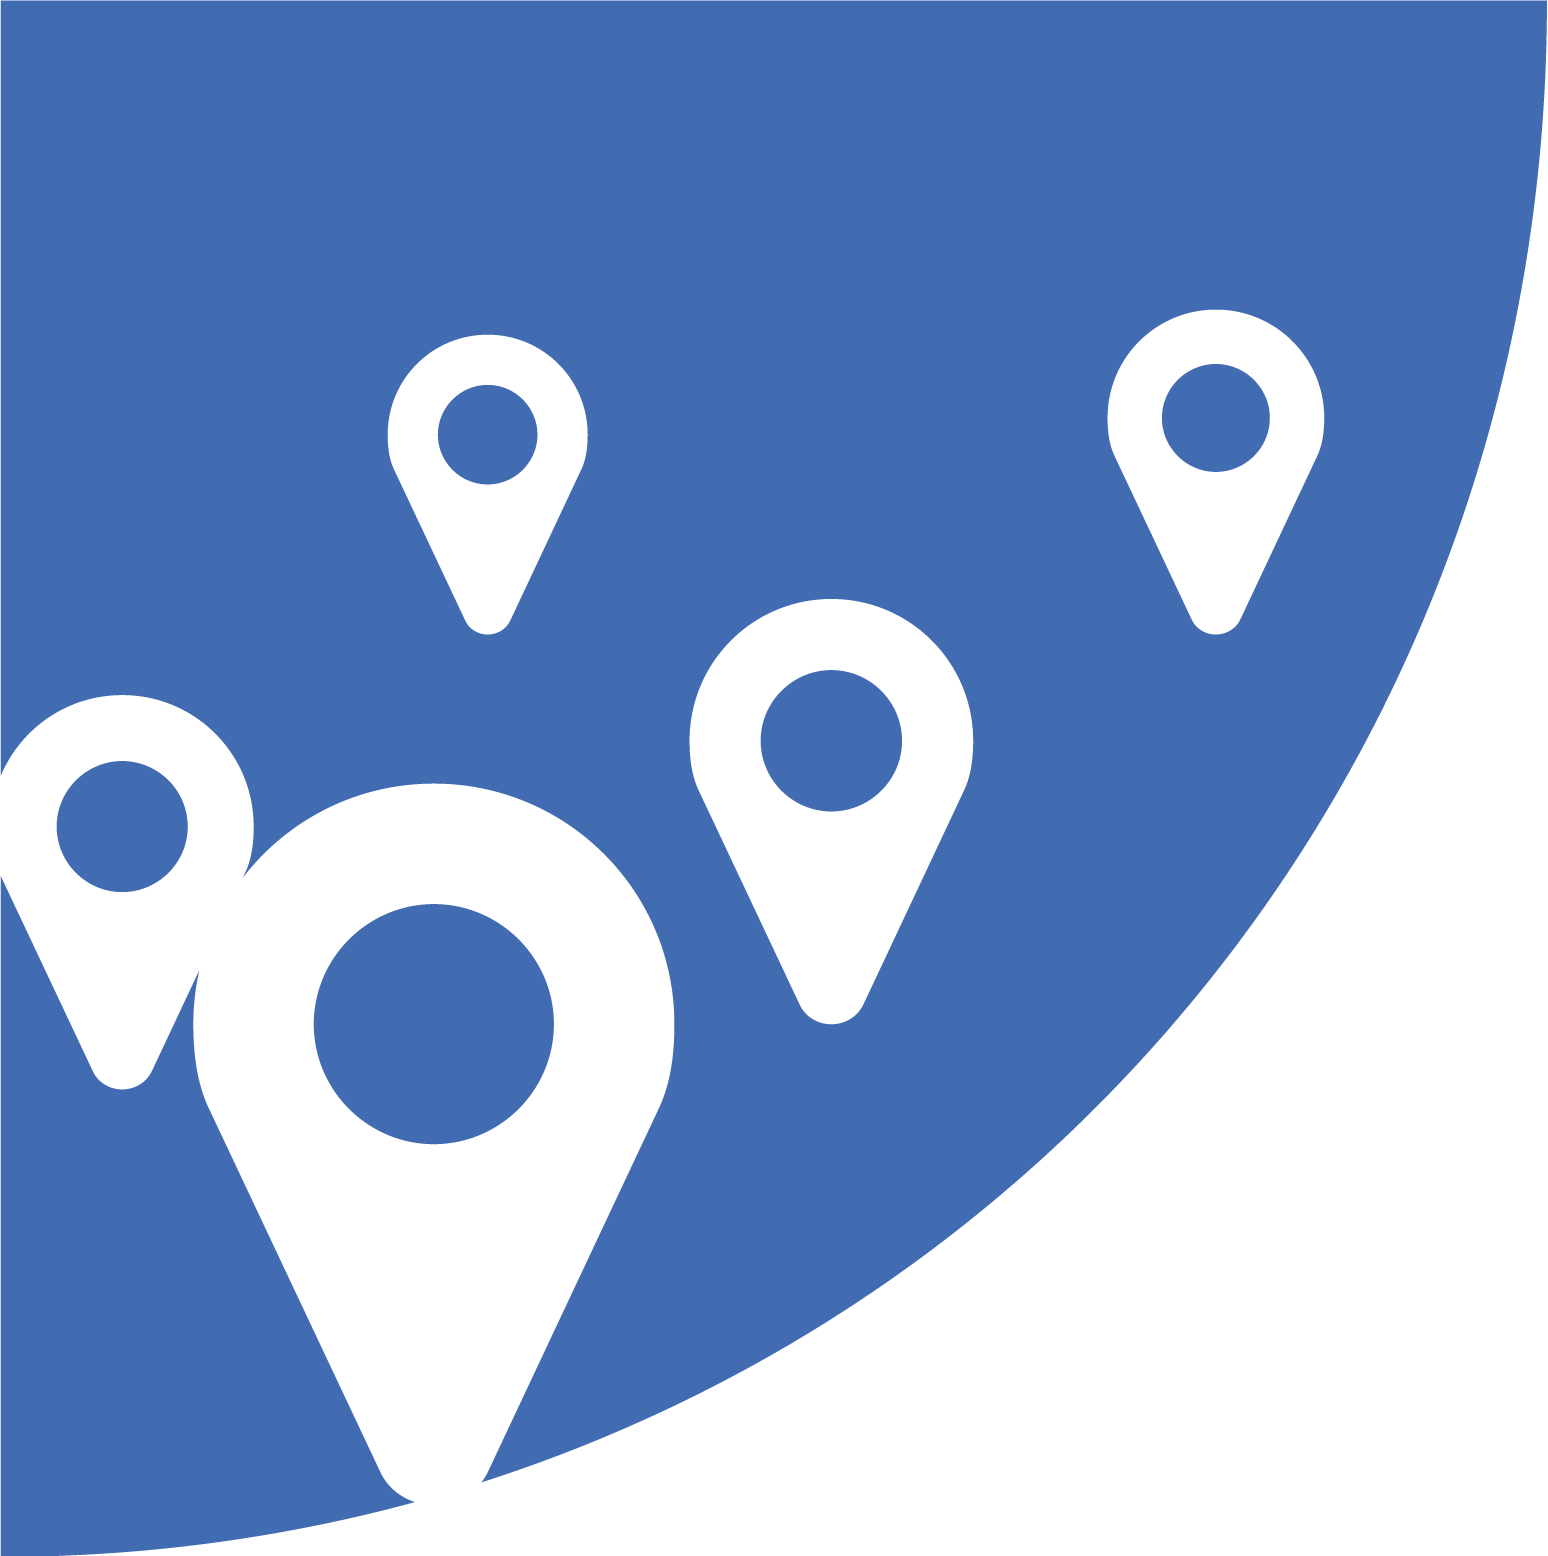 Blue shape with location pins